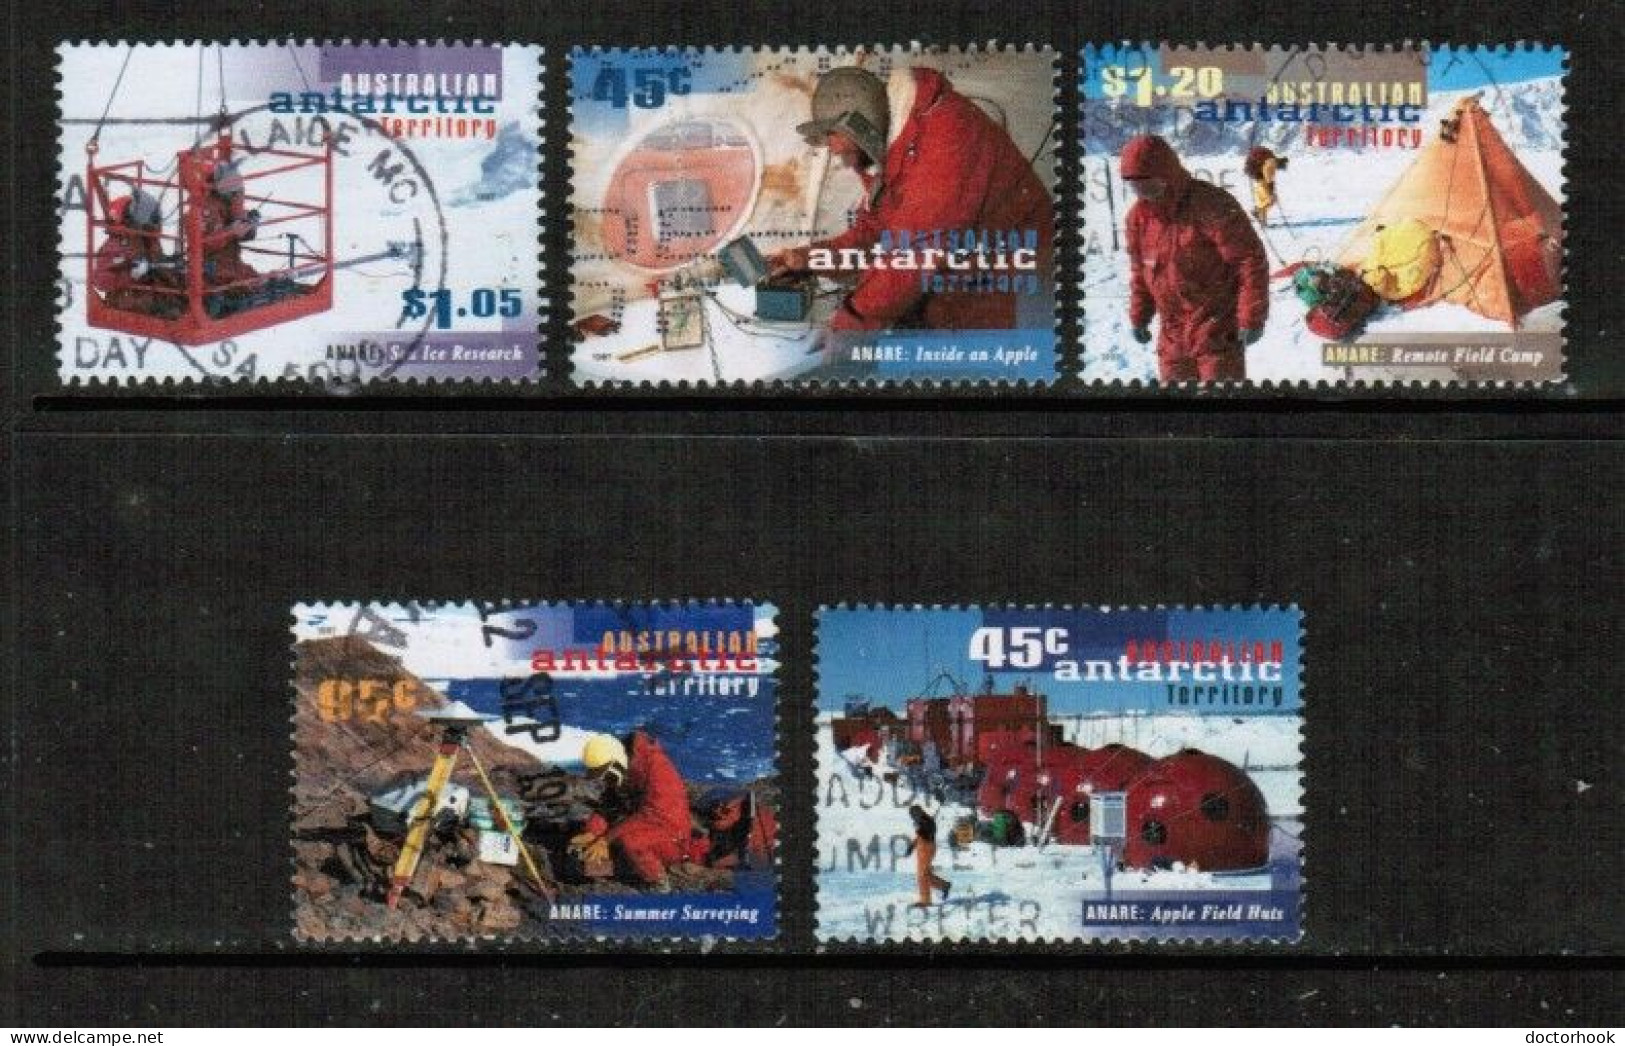 AUSTRALIAN ANTARCTIC TERRITORY   Scott # L 102-6 USED (CONDITION AS PER SCAN) (Stamp Scan # 929-9) - Gebraucht